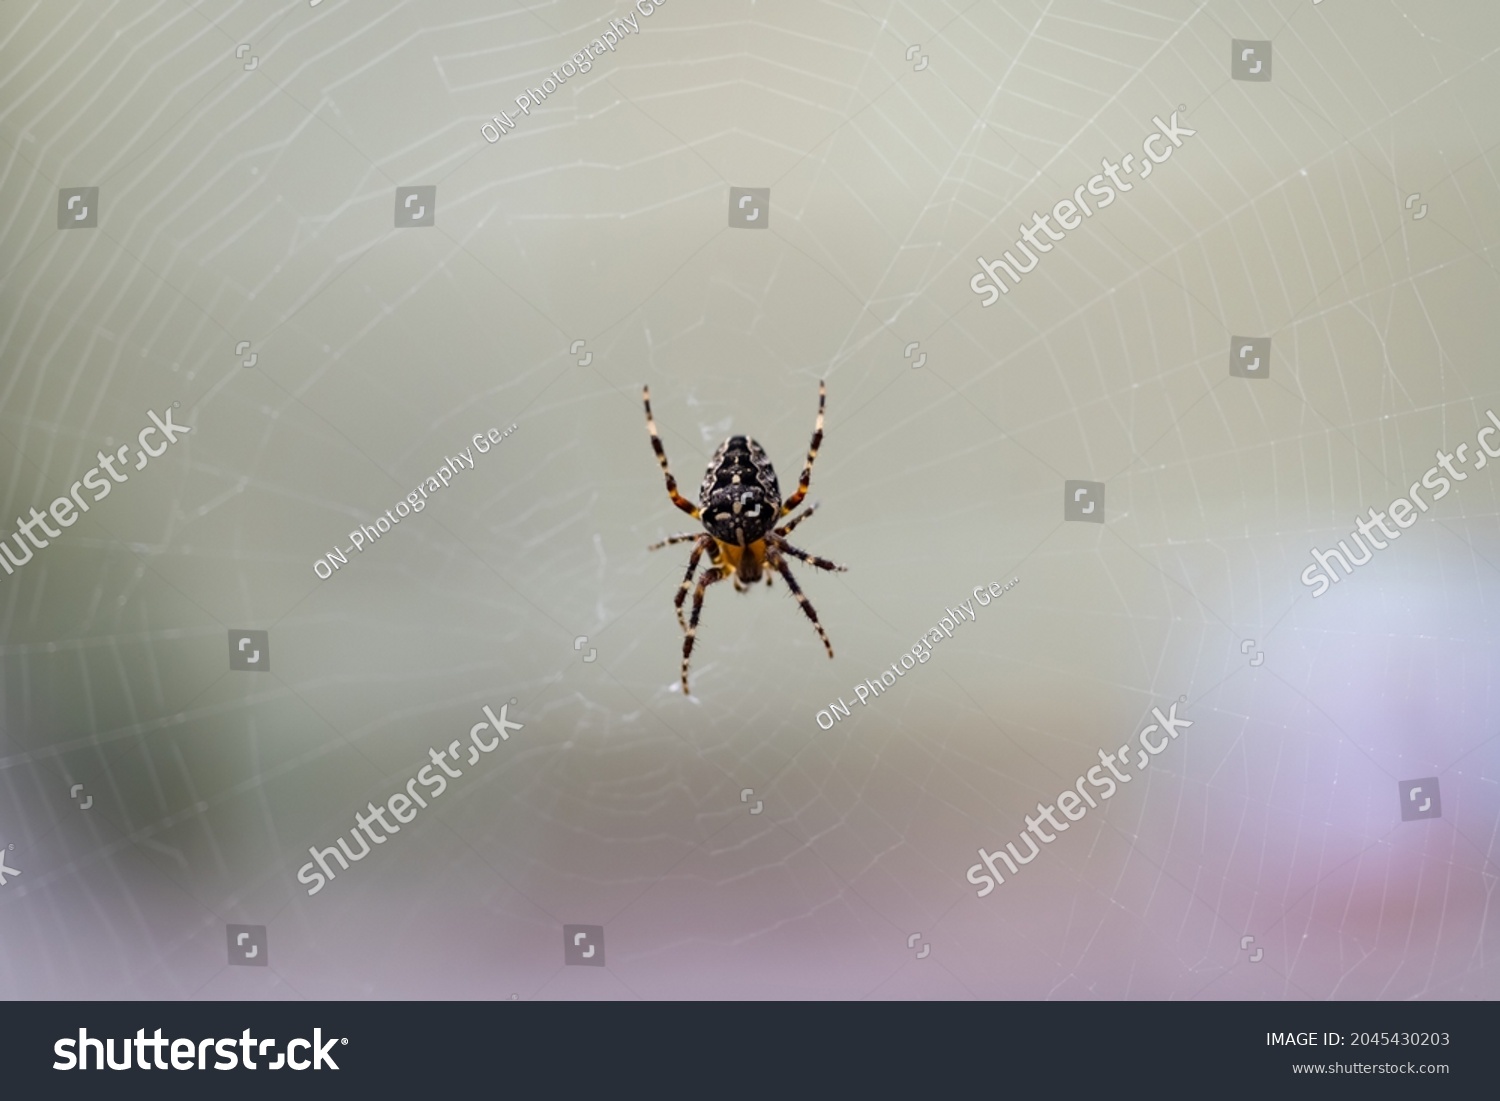 Spider in its web, macro close up with selective focus. Araneus is a genus of common orb-weaving spiders. It includes about 650 species, among which are the European garden spider and the barn spider. #2045430203